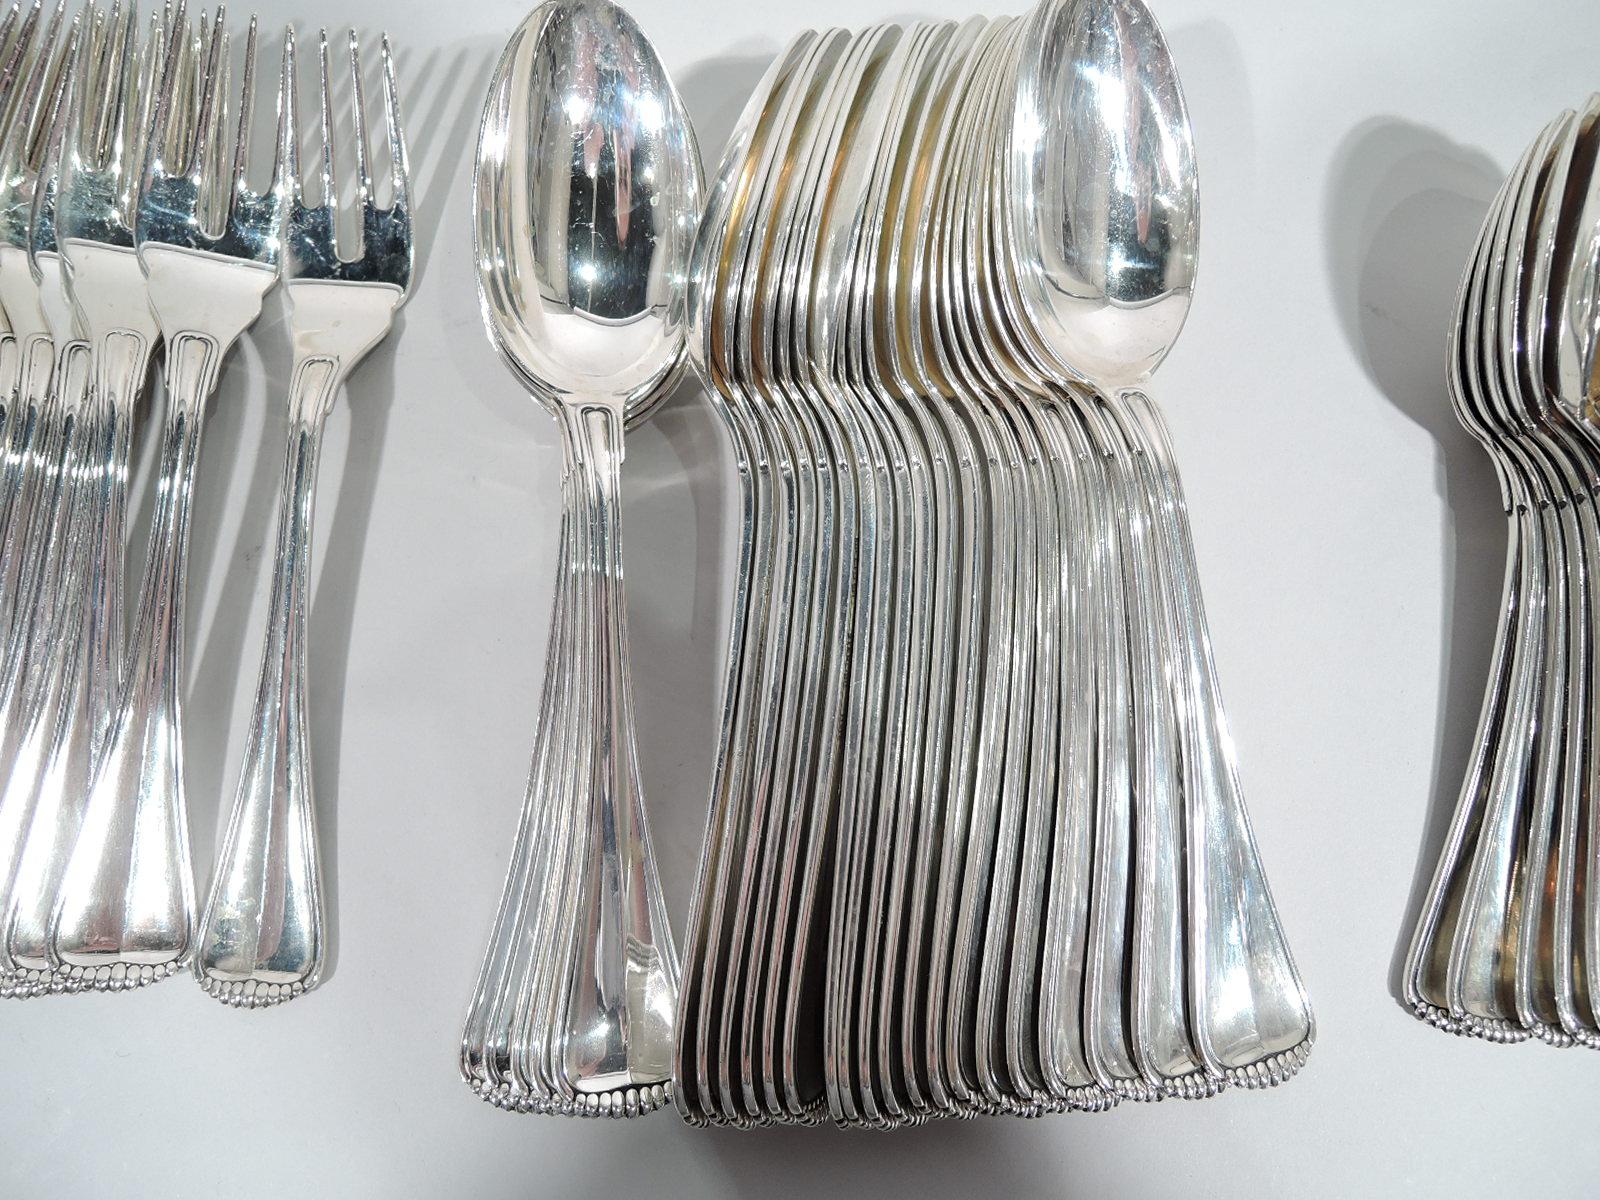 Buccellati Milano Sterling Silver Dinner Set for 24 with 120 Pieces 1